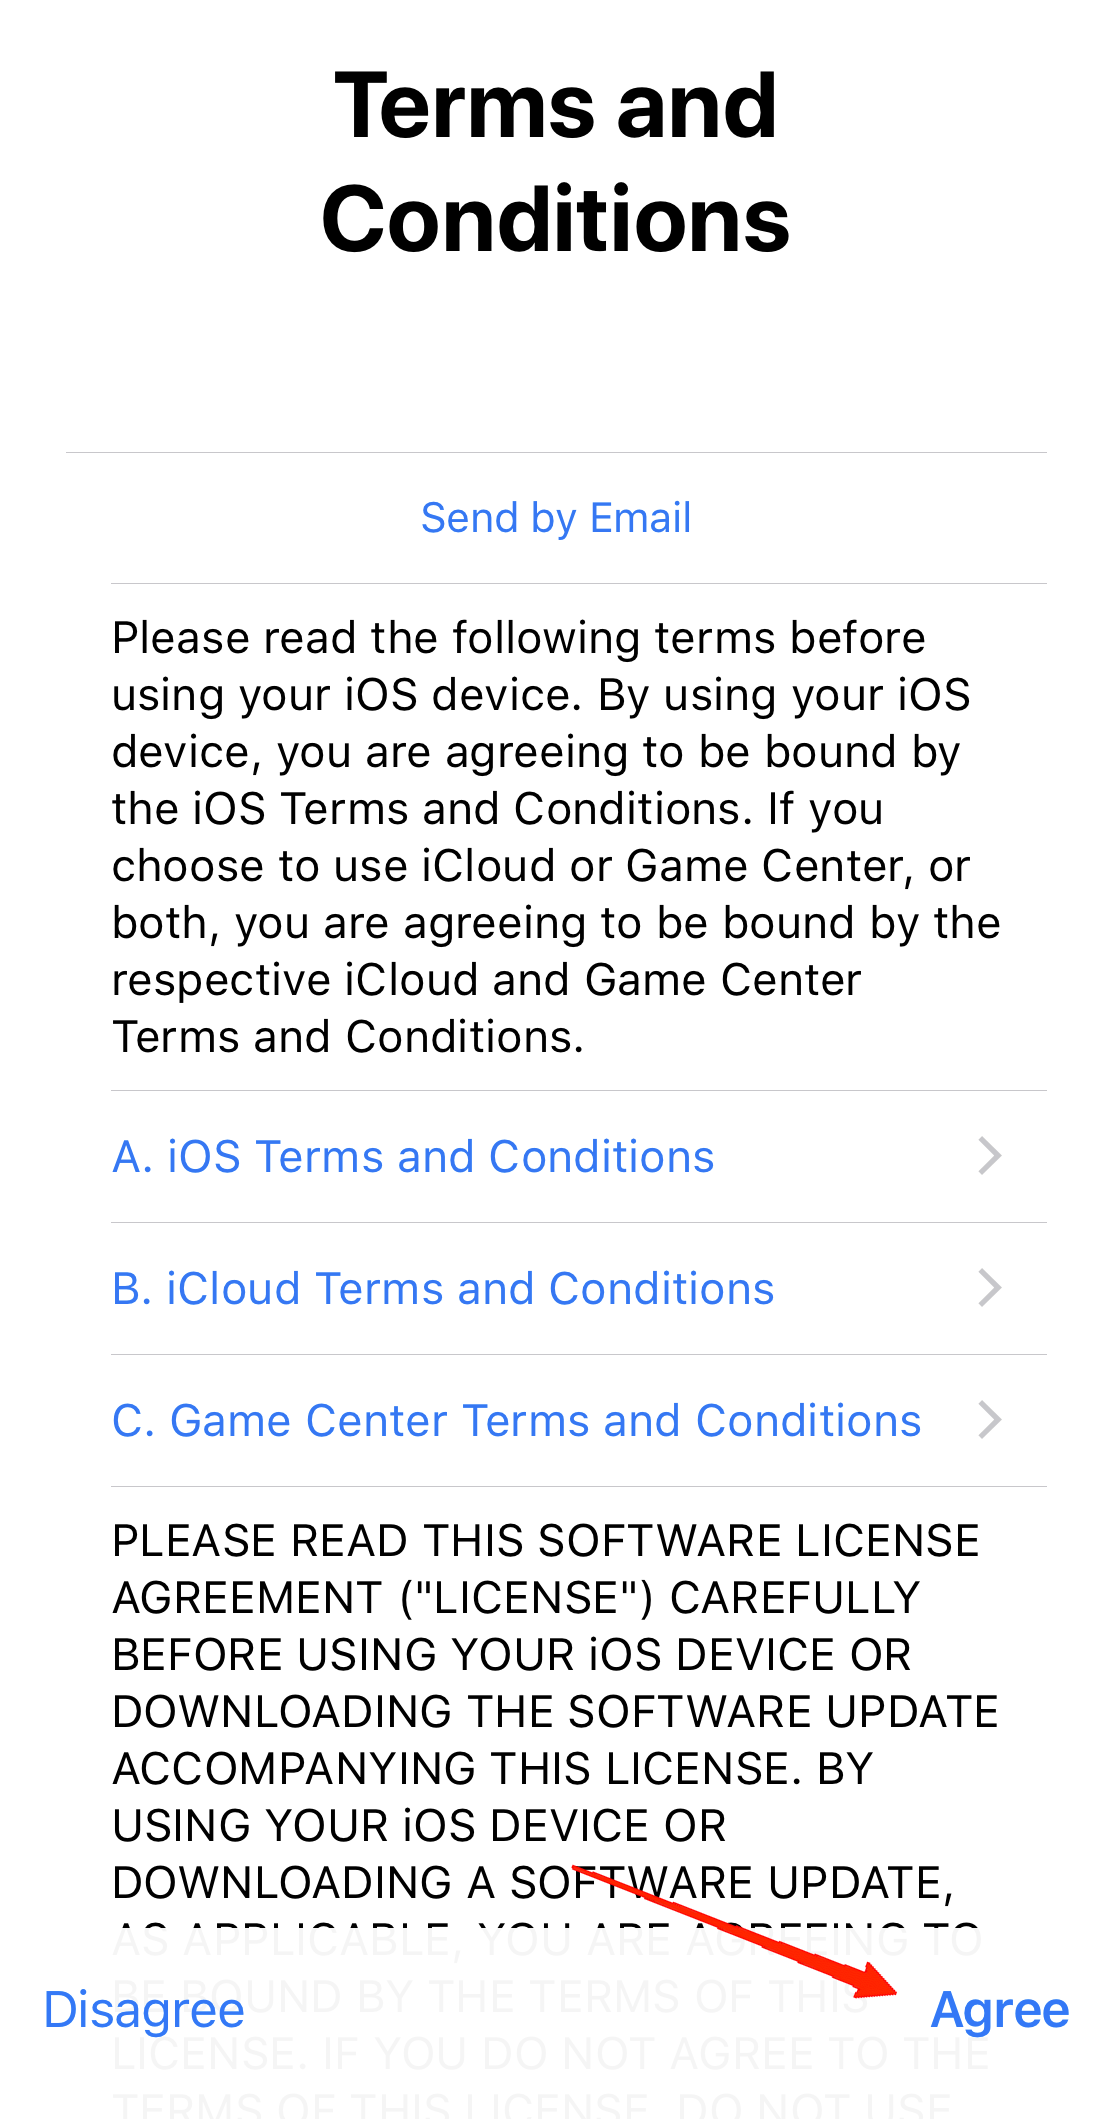 Agree to the new iCloud terms and conditions